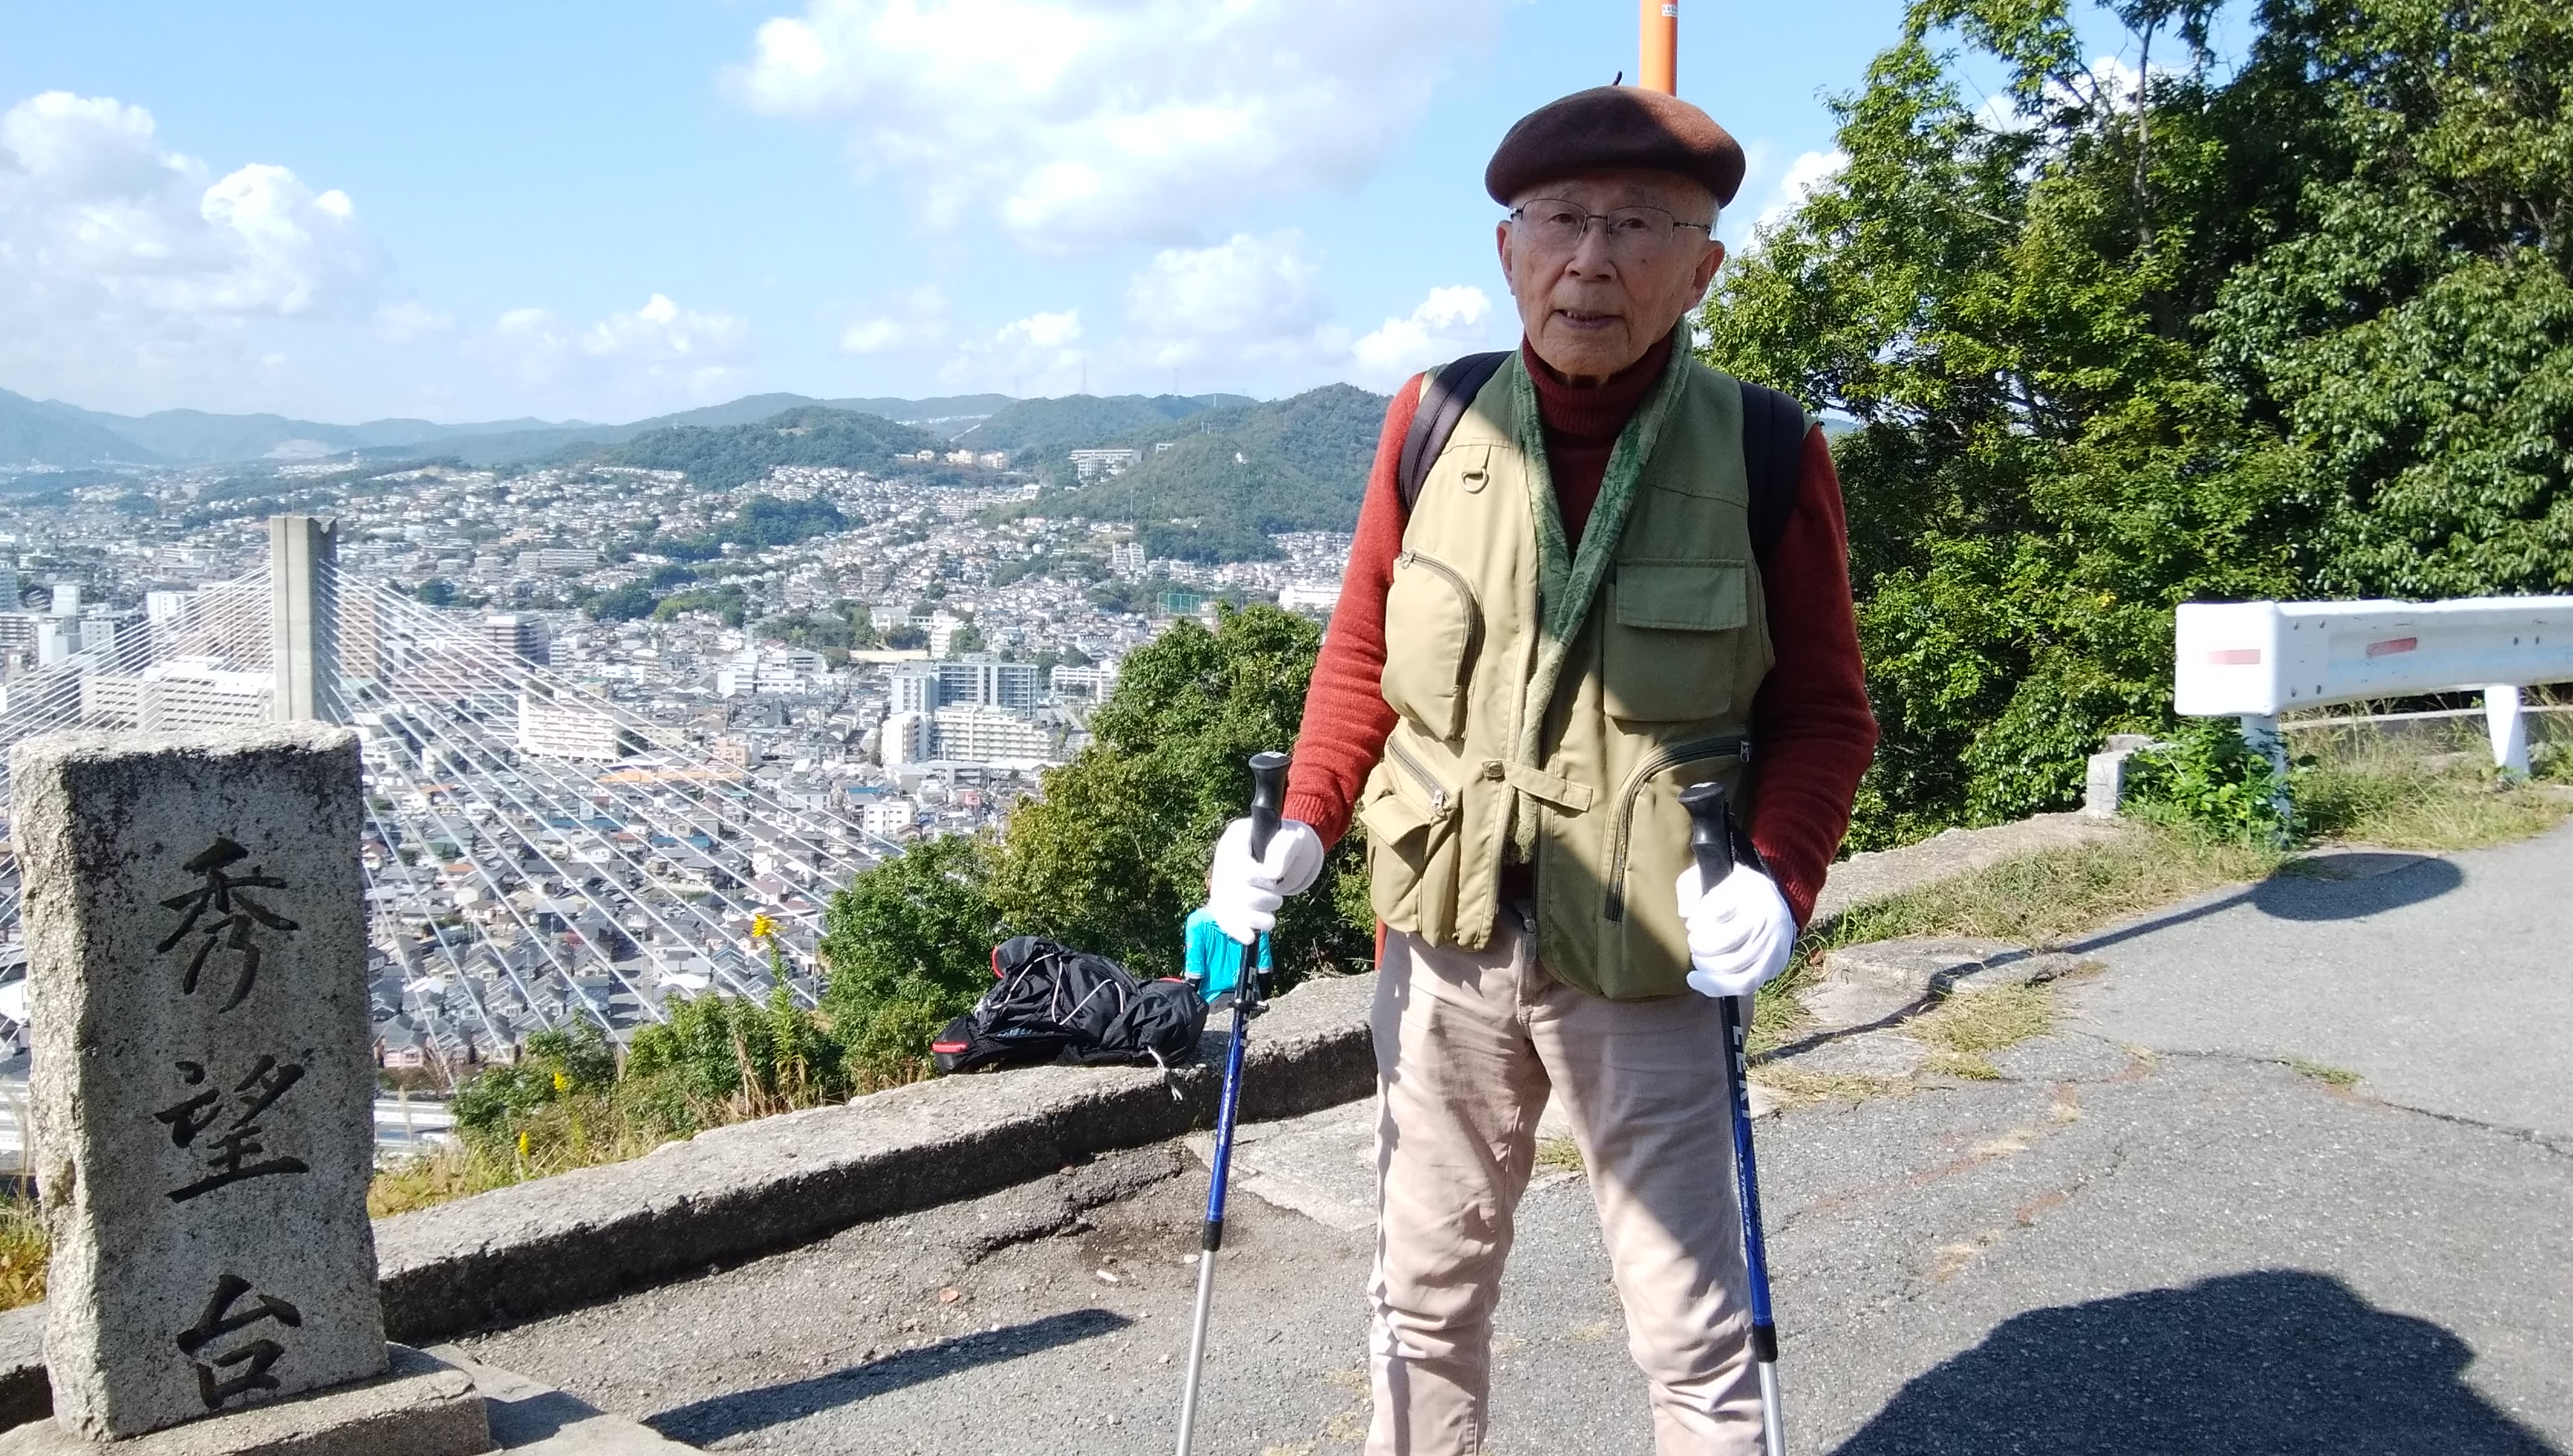 My 95-year-old Japanese grandfather is a former cardiologist—his 8 non-negotiables for a long, happy life pic picture